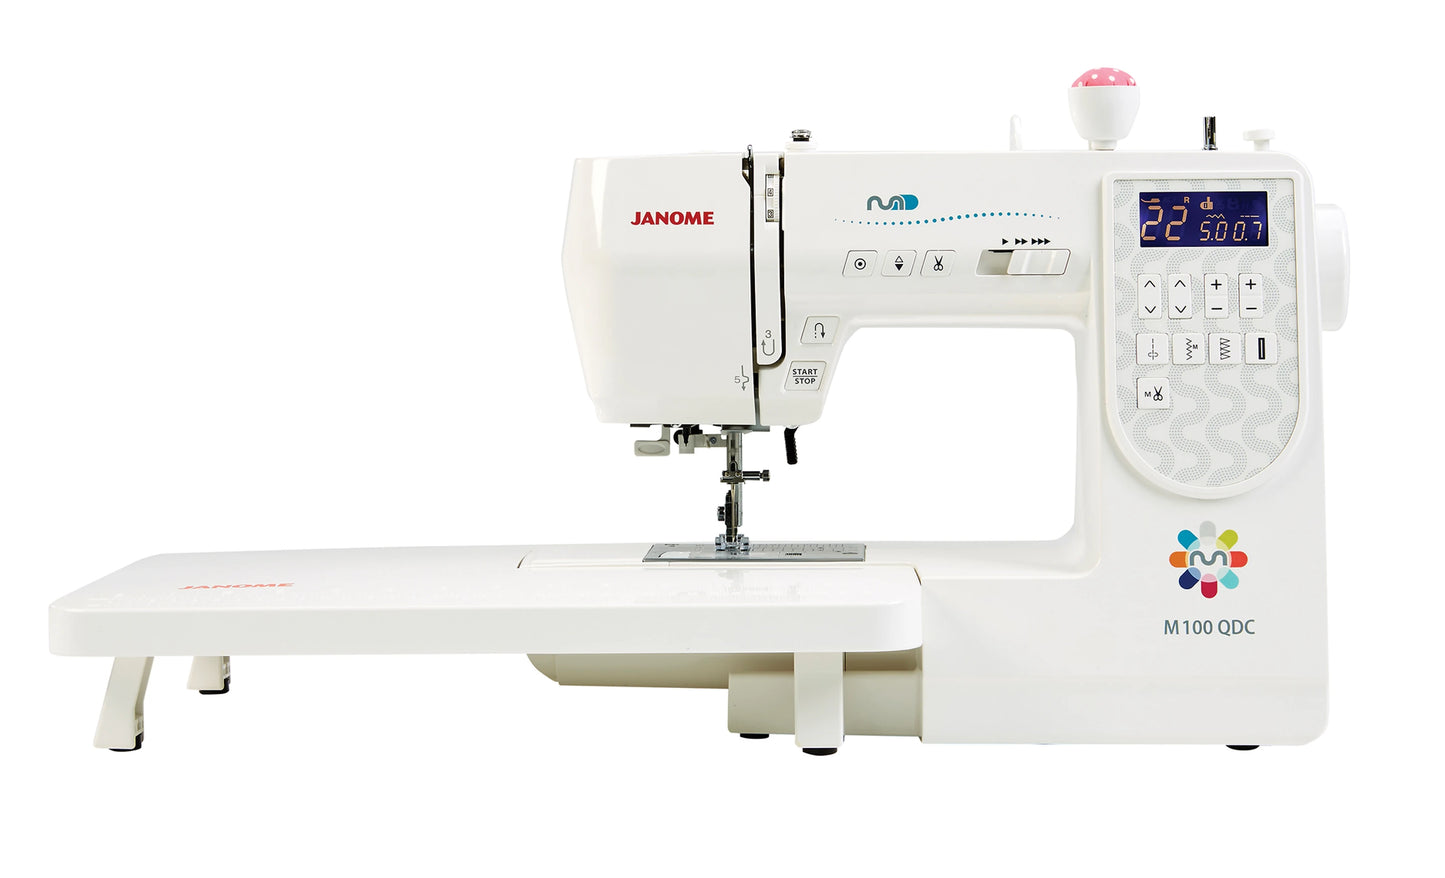 The Janome Model M100QDC Sewing Machine